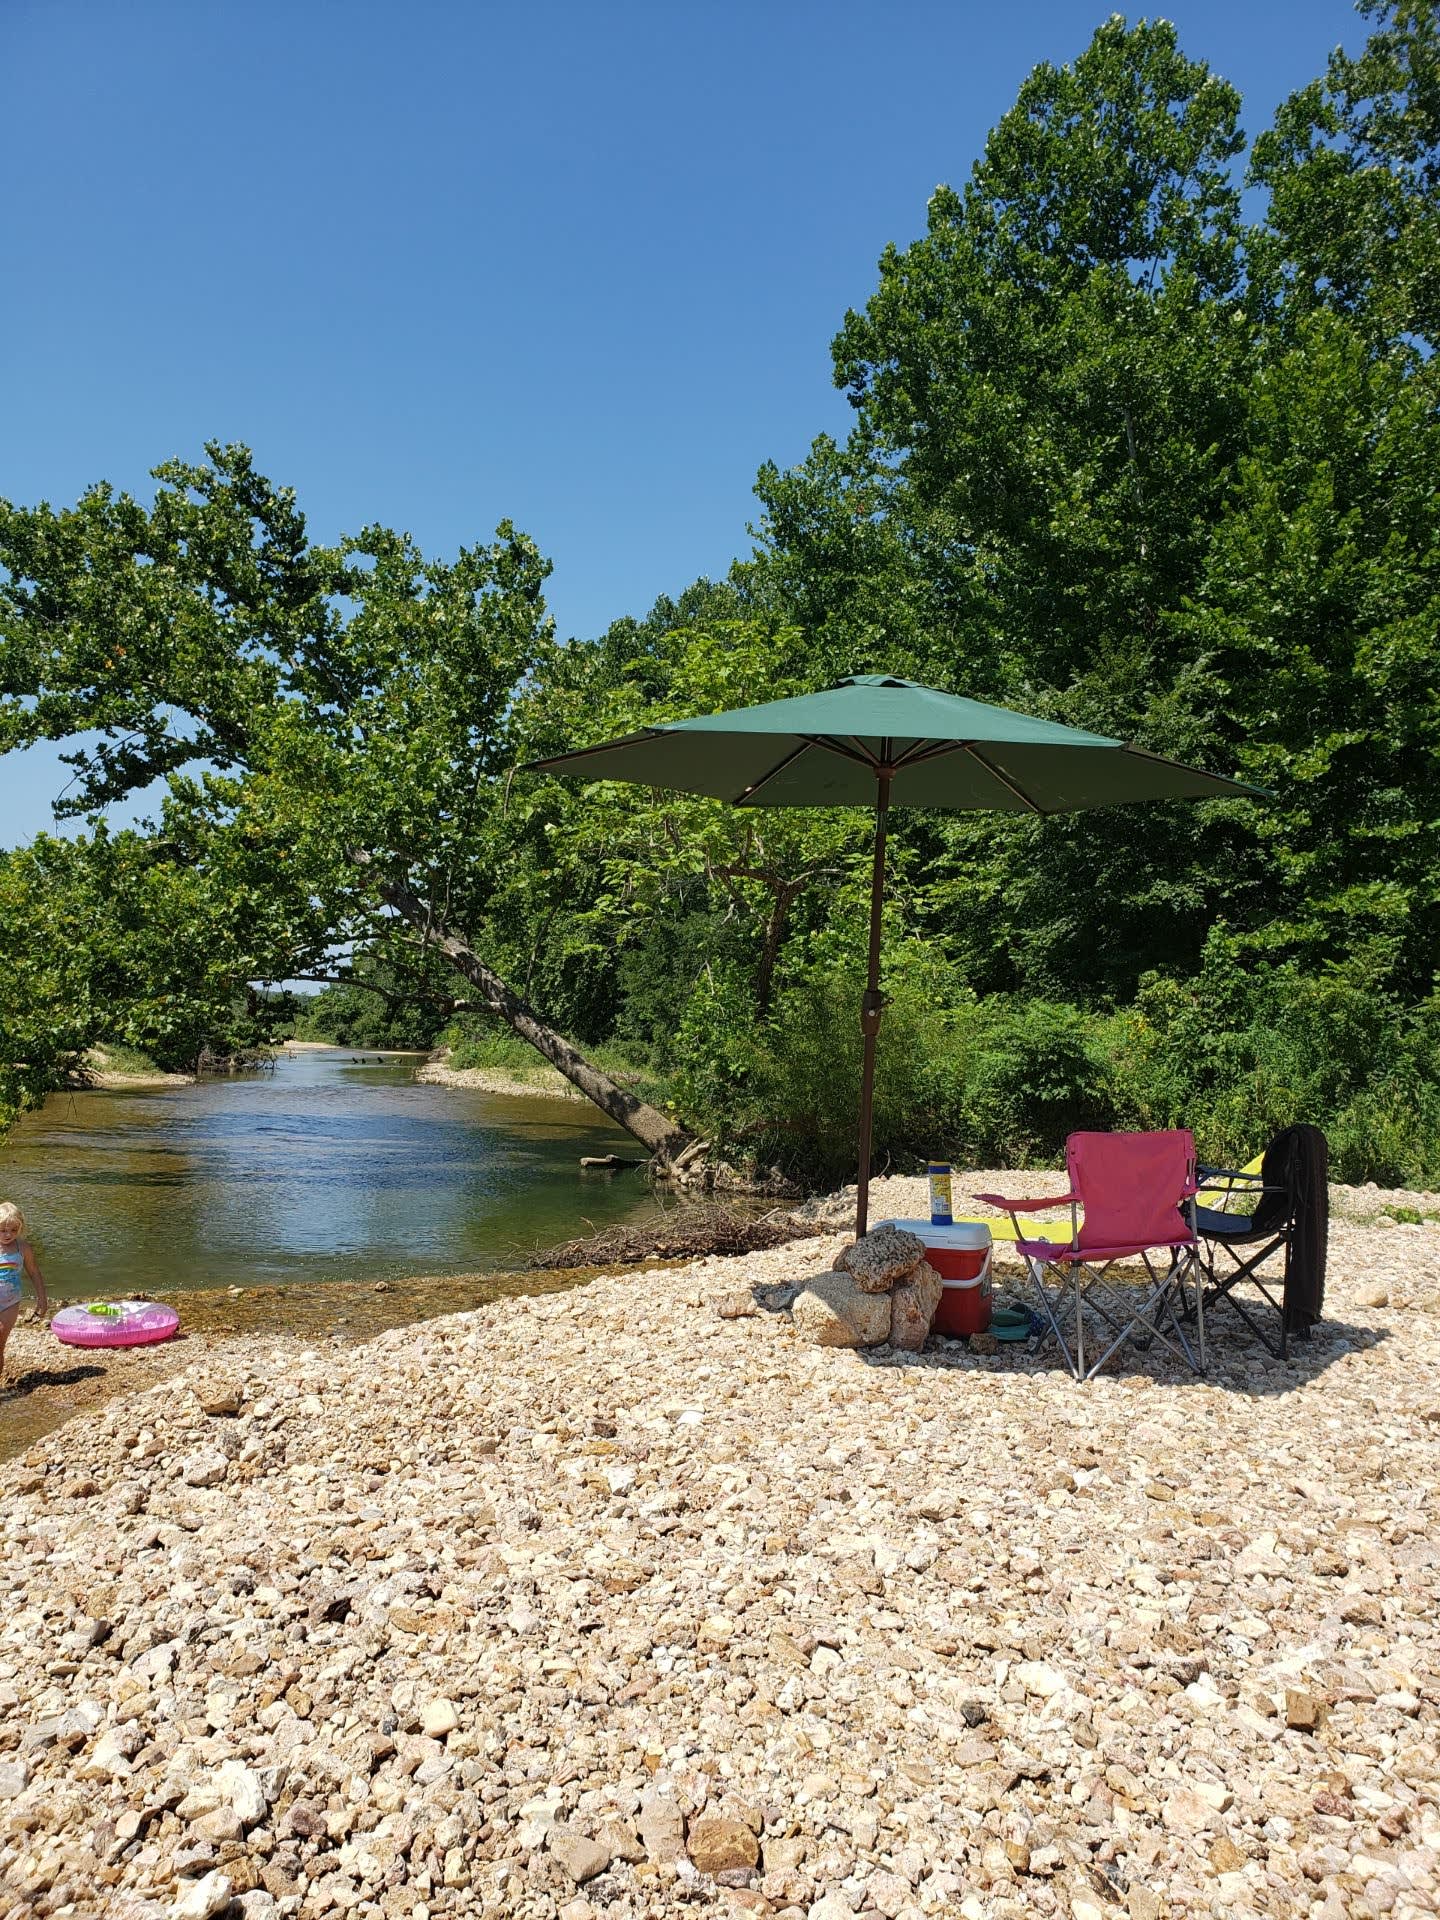 Put up a canopy next to your tent and enjoy the river.